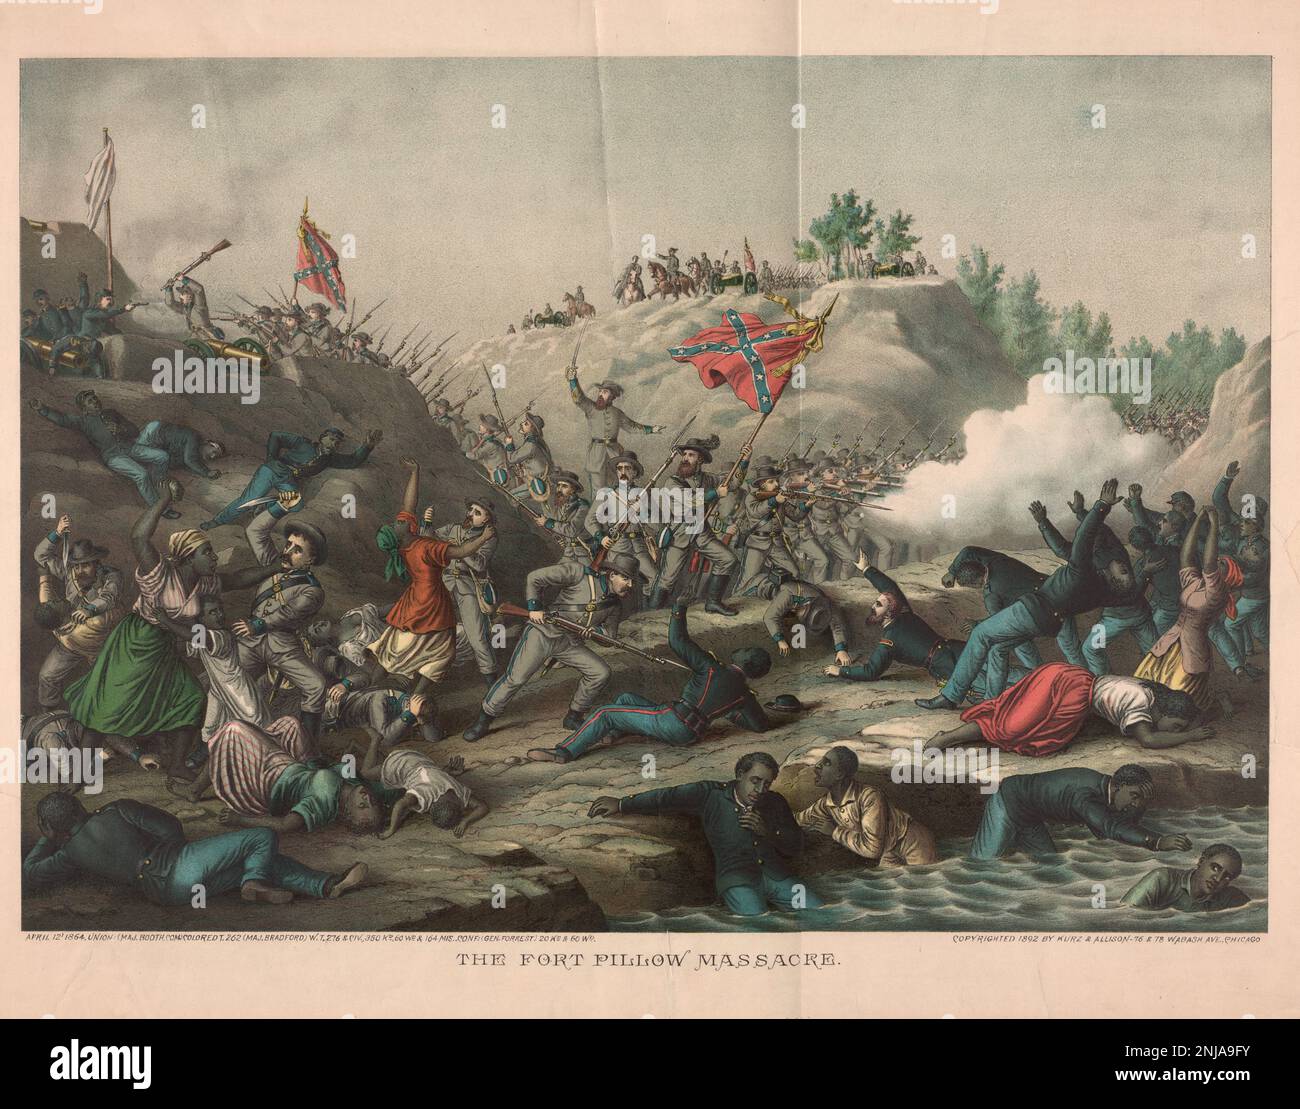 The Battle of Fort Pillow, also known as the Fort Pillow massacre, was fought on April 12, 1864, at Fort Pillow on the Mississippi River in Henning, Tennessee, during the American Civil War, colour illustration from 1892 Stock Photo